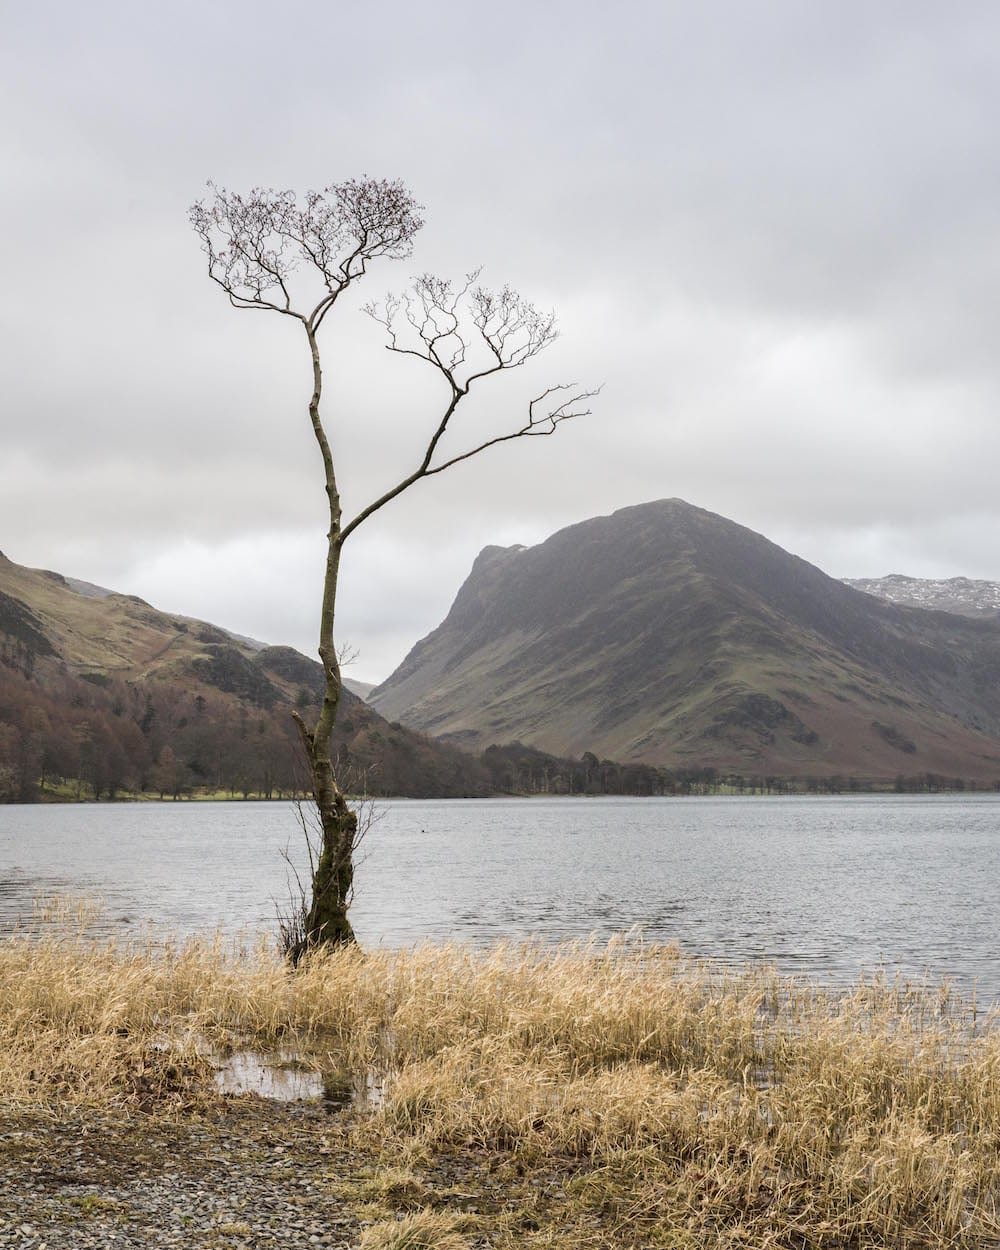 A lone tree on the edge of a lake in the mountains